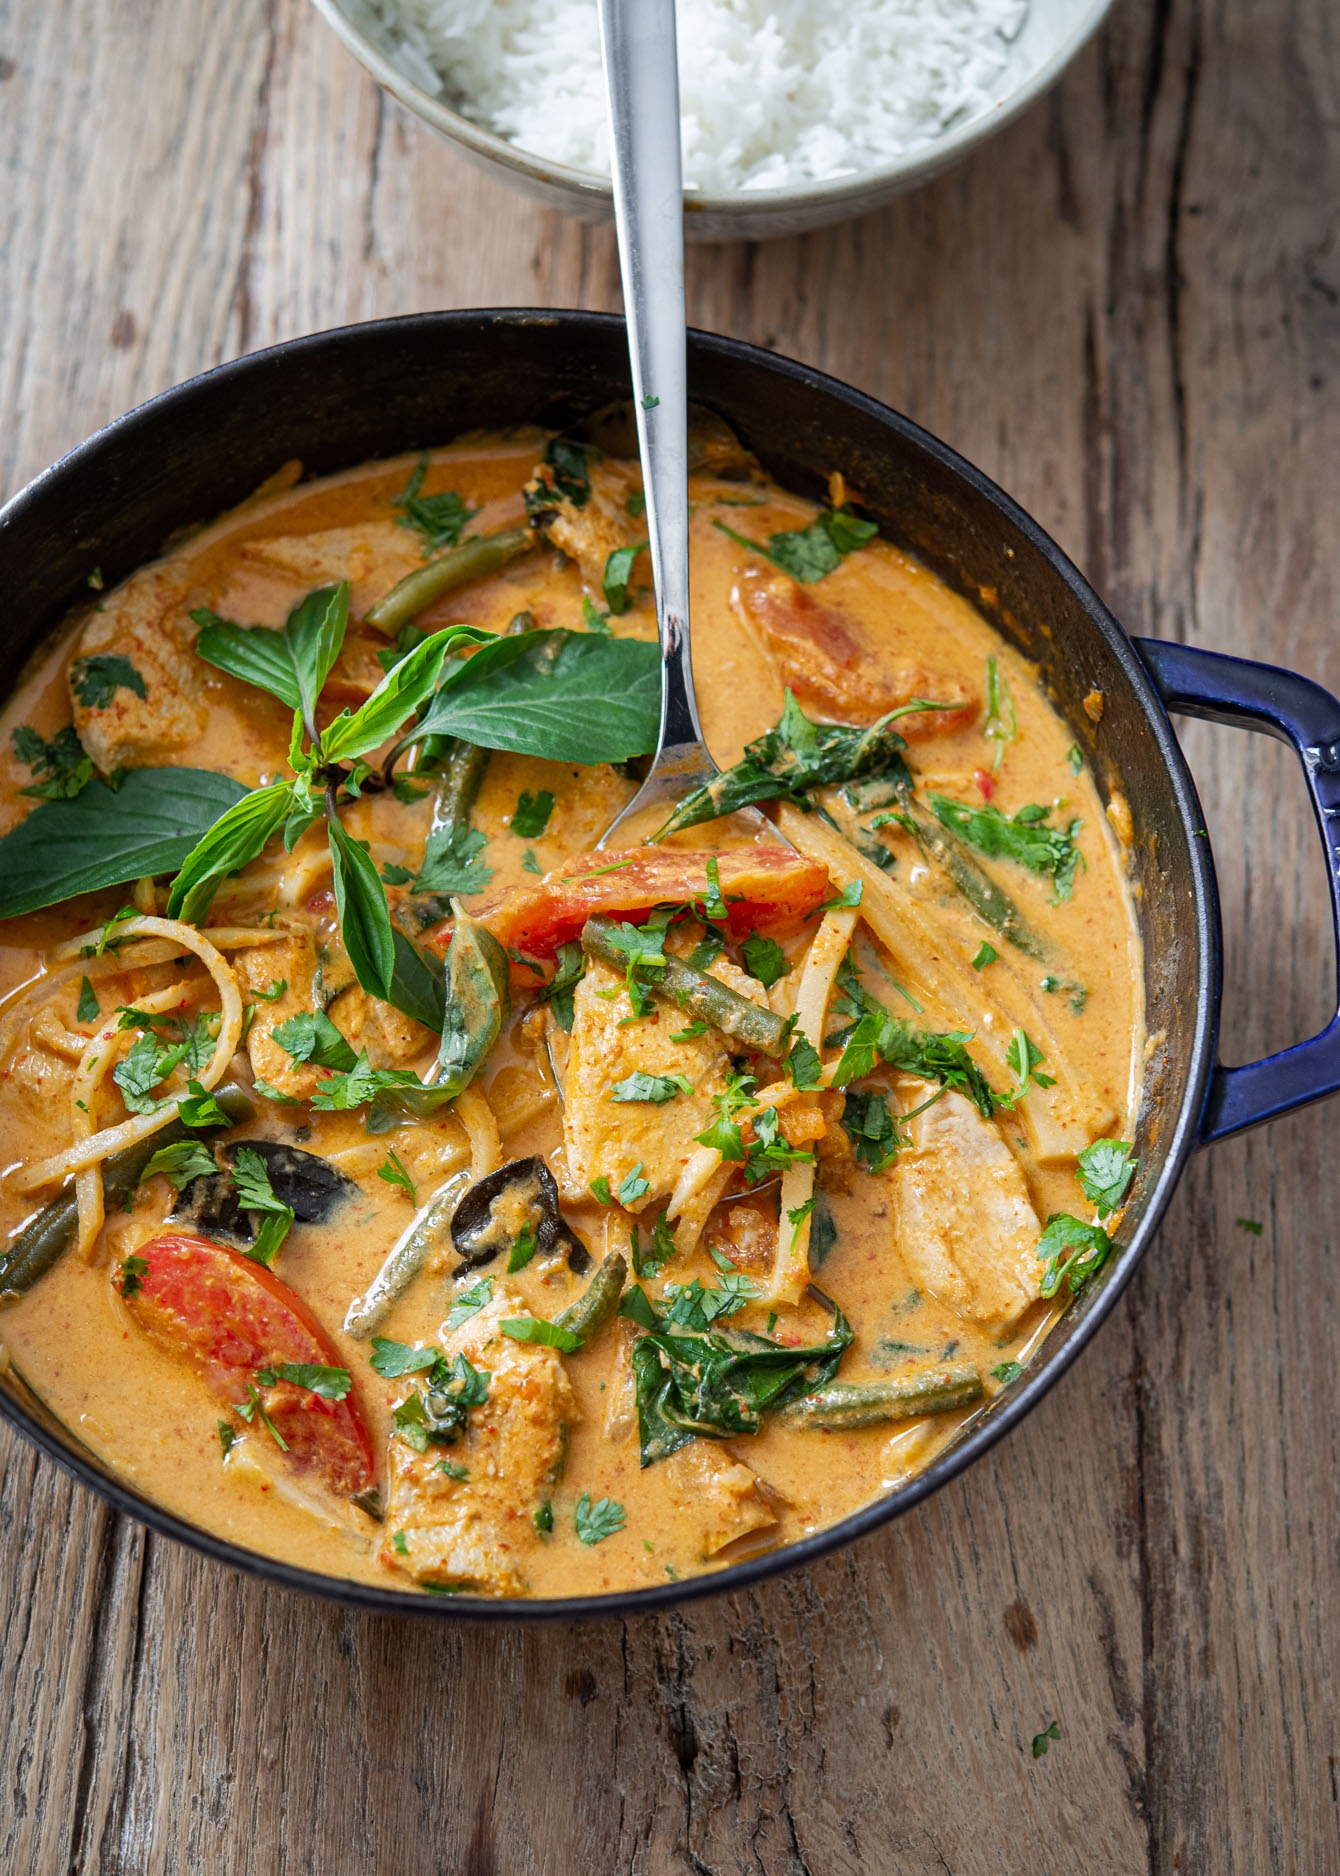 Thai red curry made with chicken and vegetables in a pot